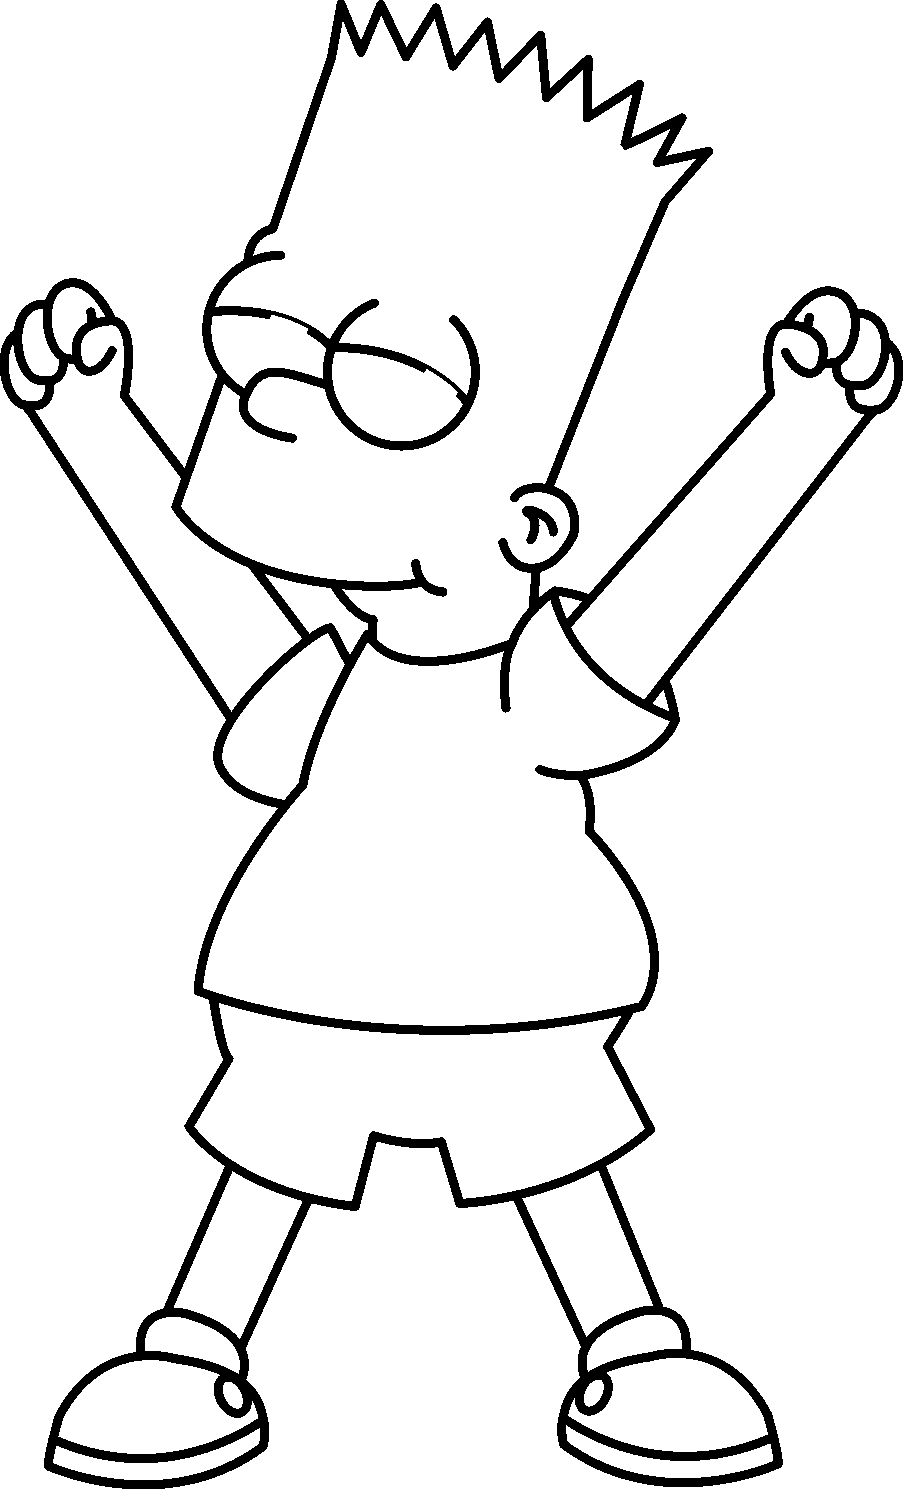 Download Free Printable Simpsons Coloring Pages For Kids